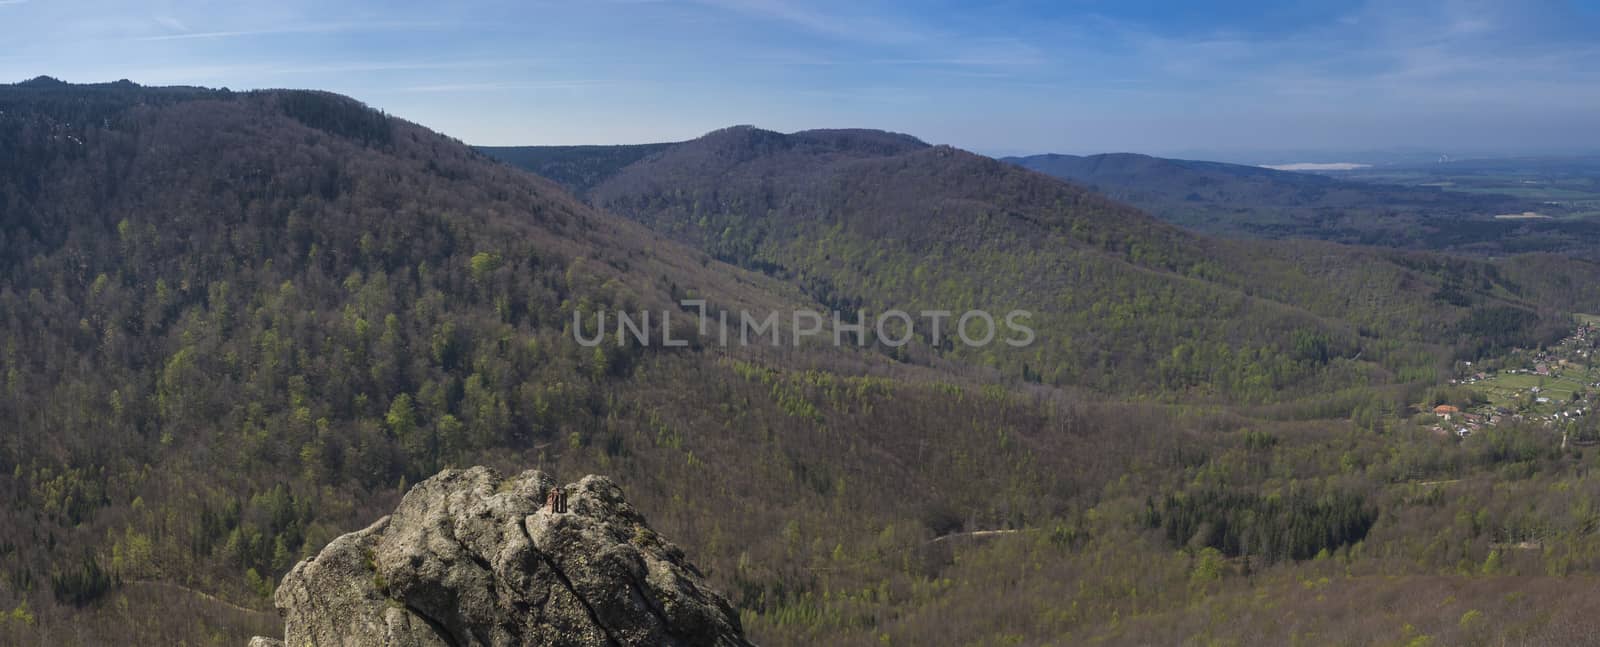 Panoramic landscape of Jizera Mountains jizerske hory, view from peak oresnik mountain with lush green spruce tree forest, hills and village Hejnice, blue sky background.